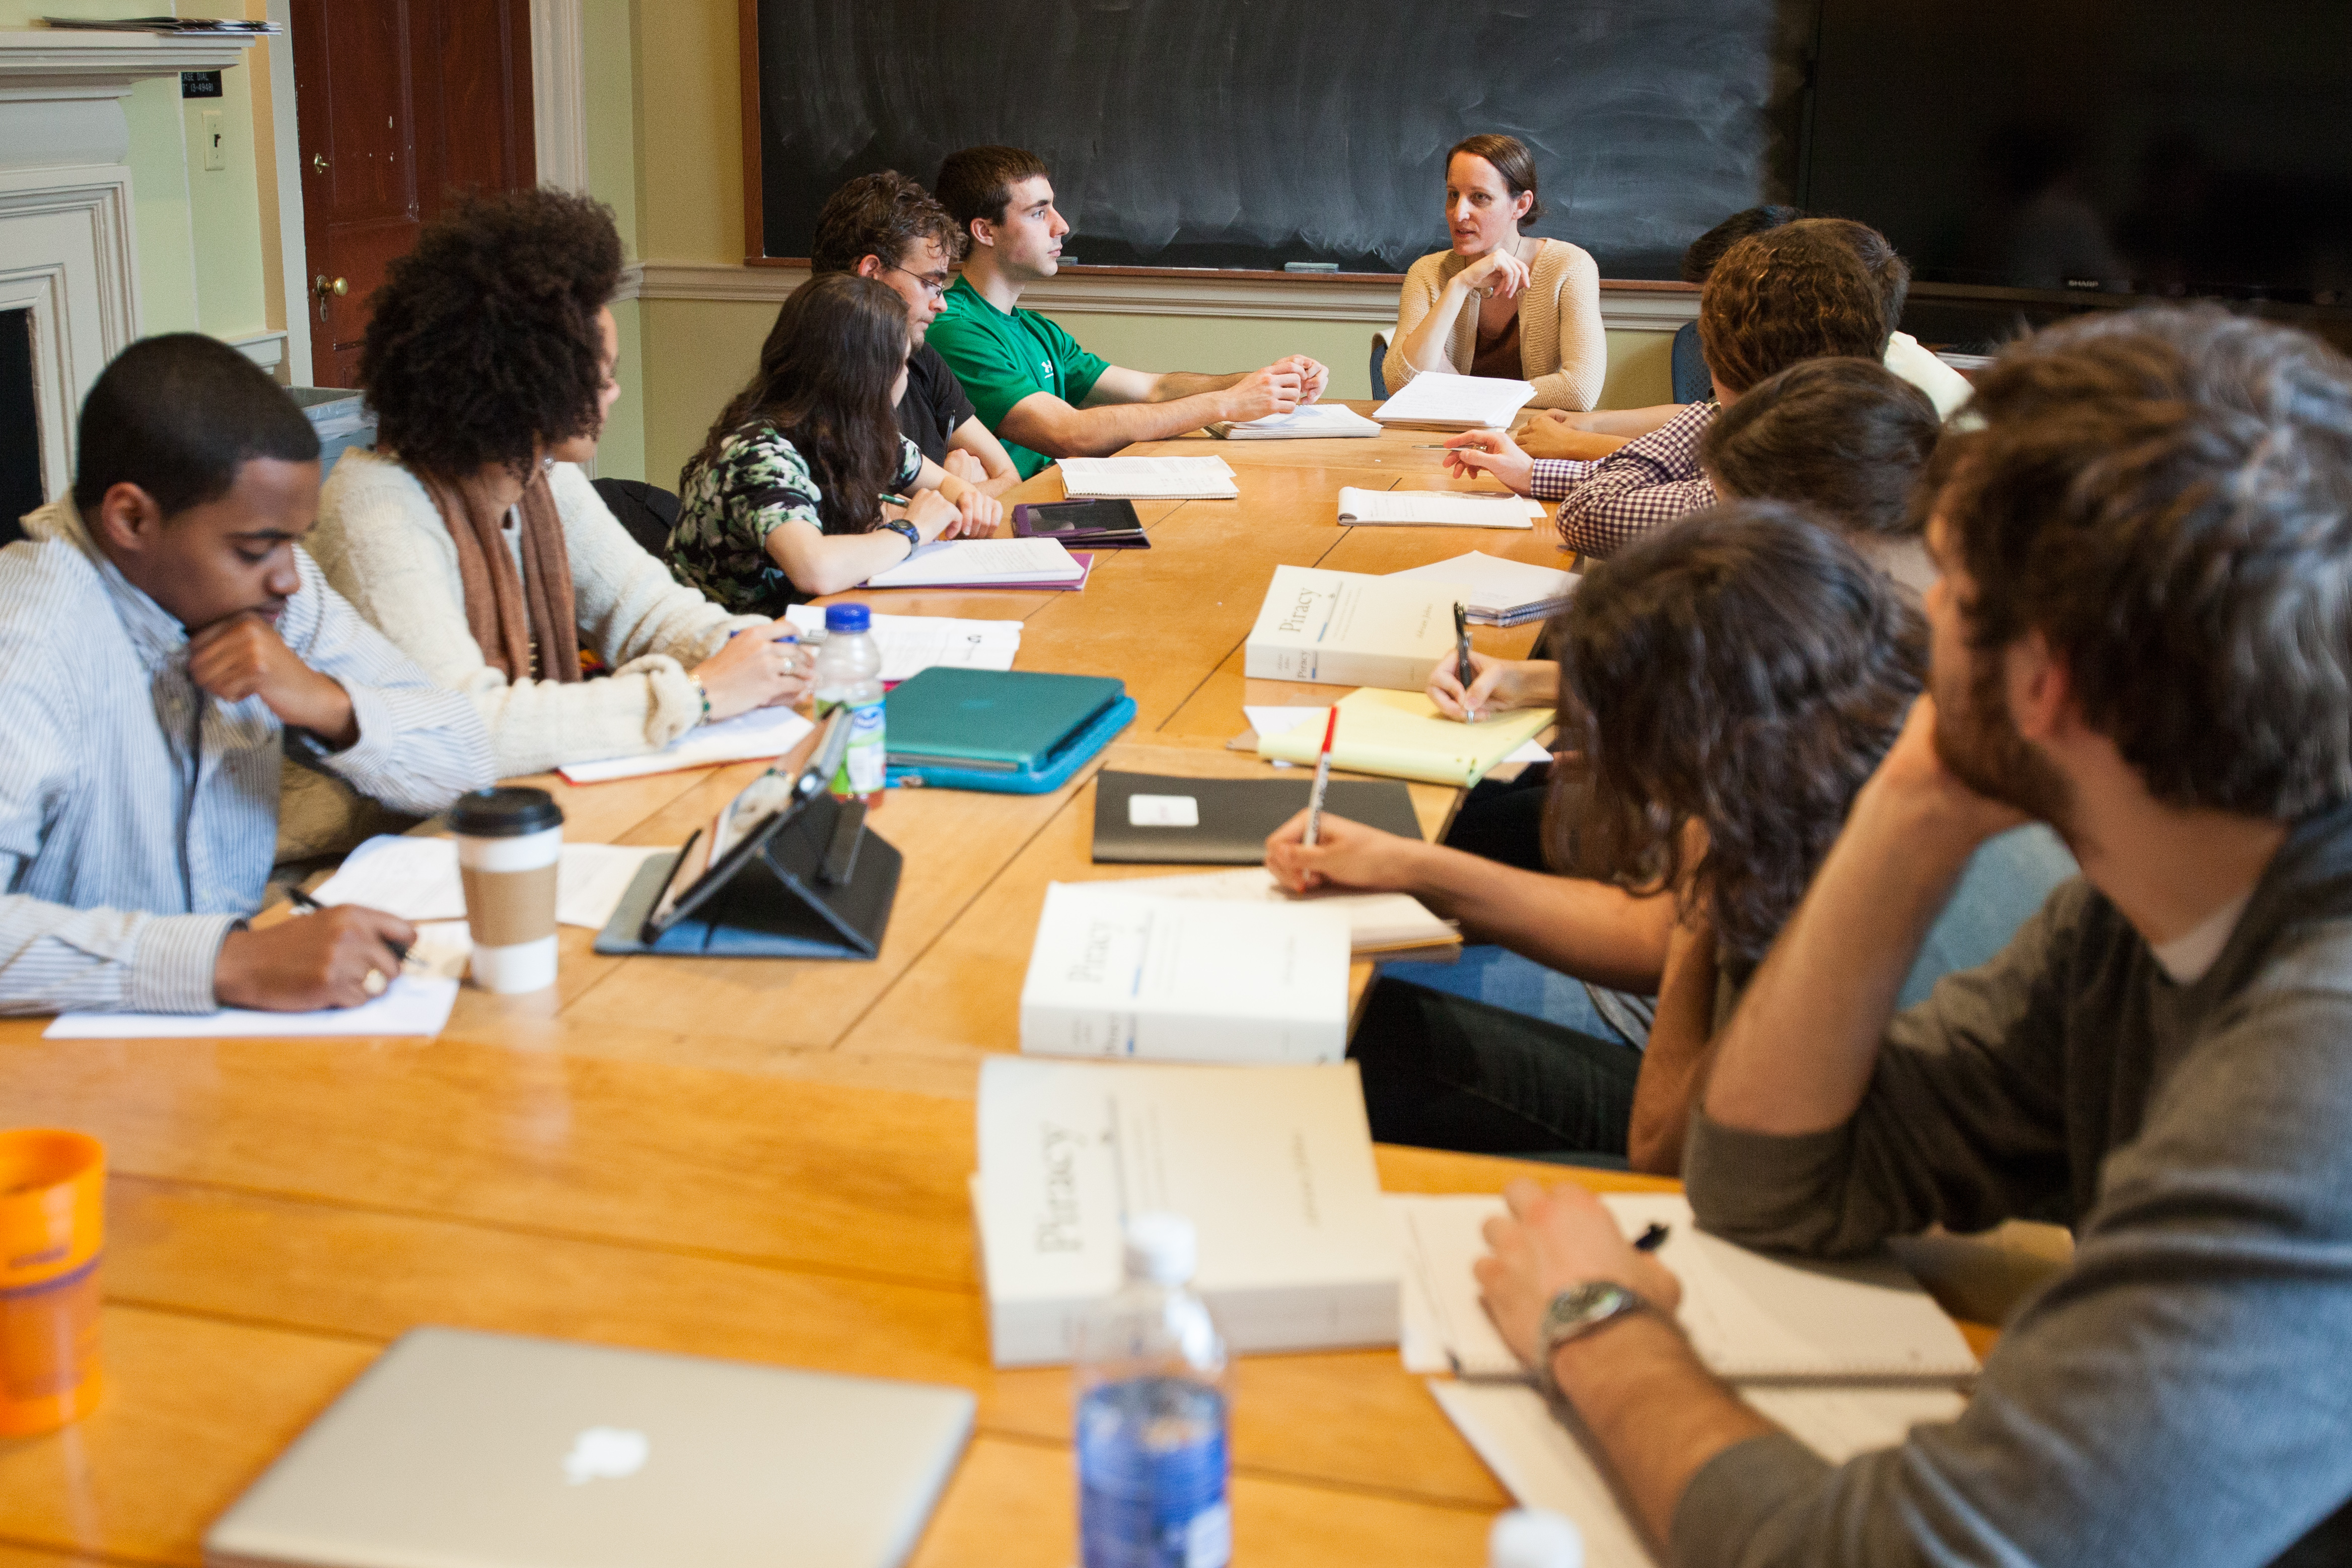 Students sitting at a table listening and taking notes of a professor talking at the head of the table